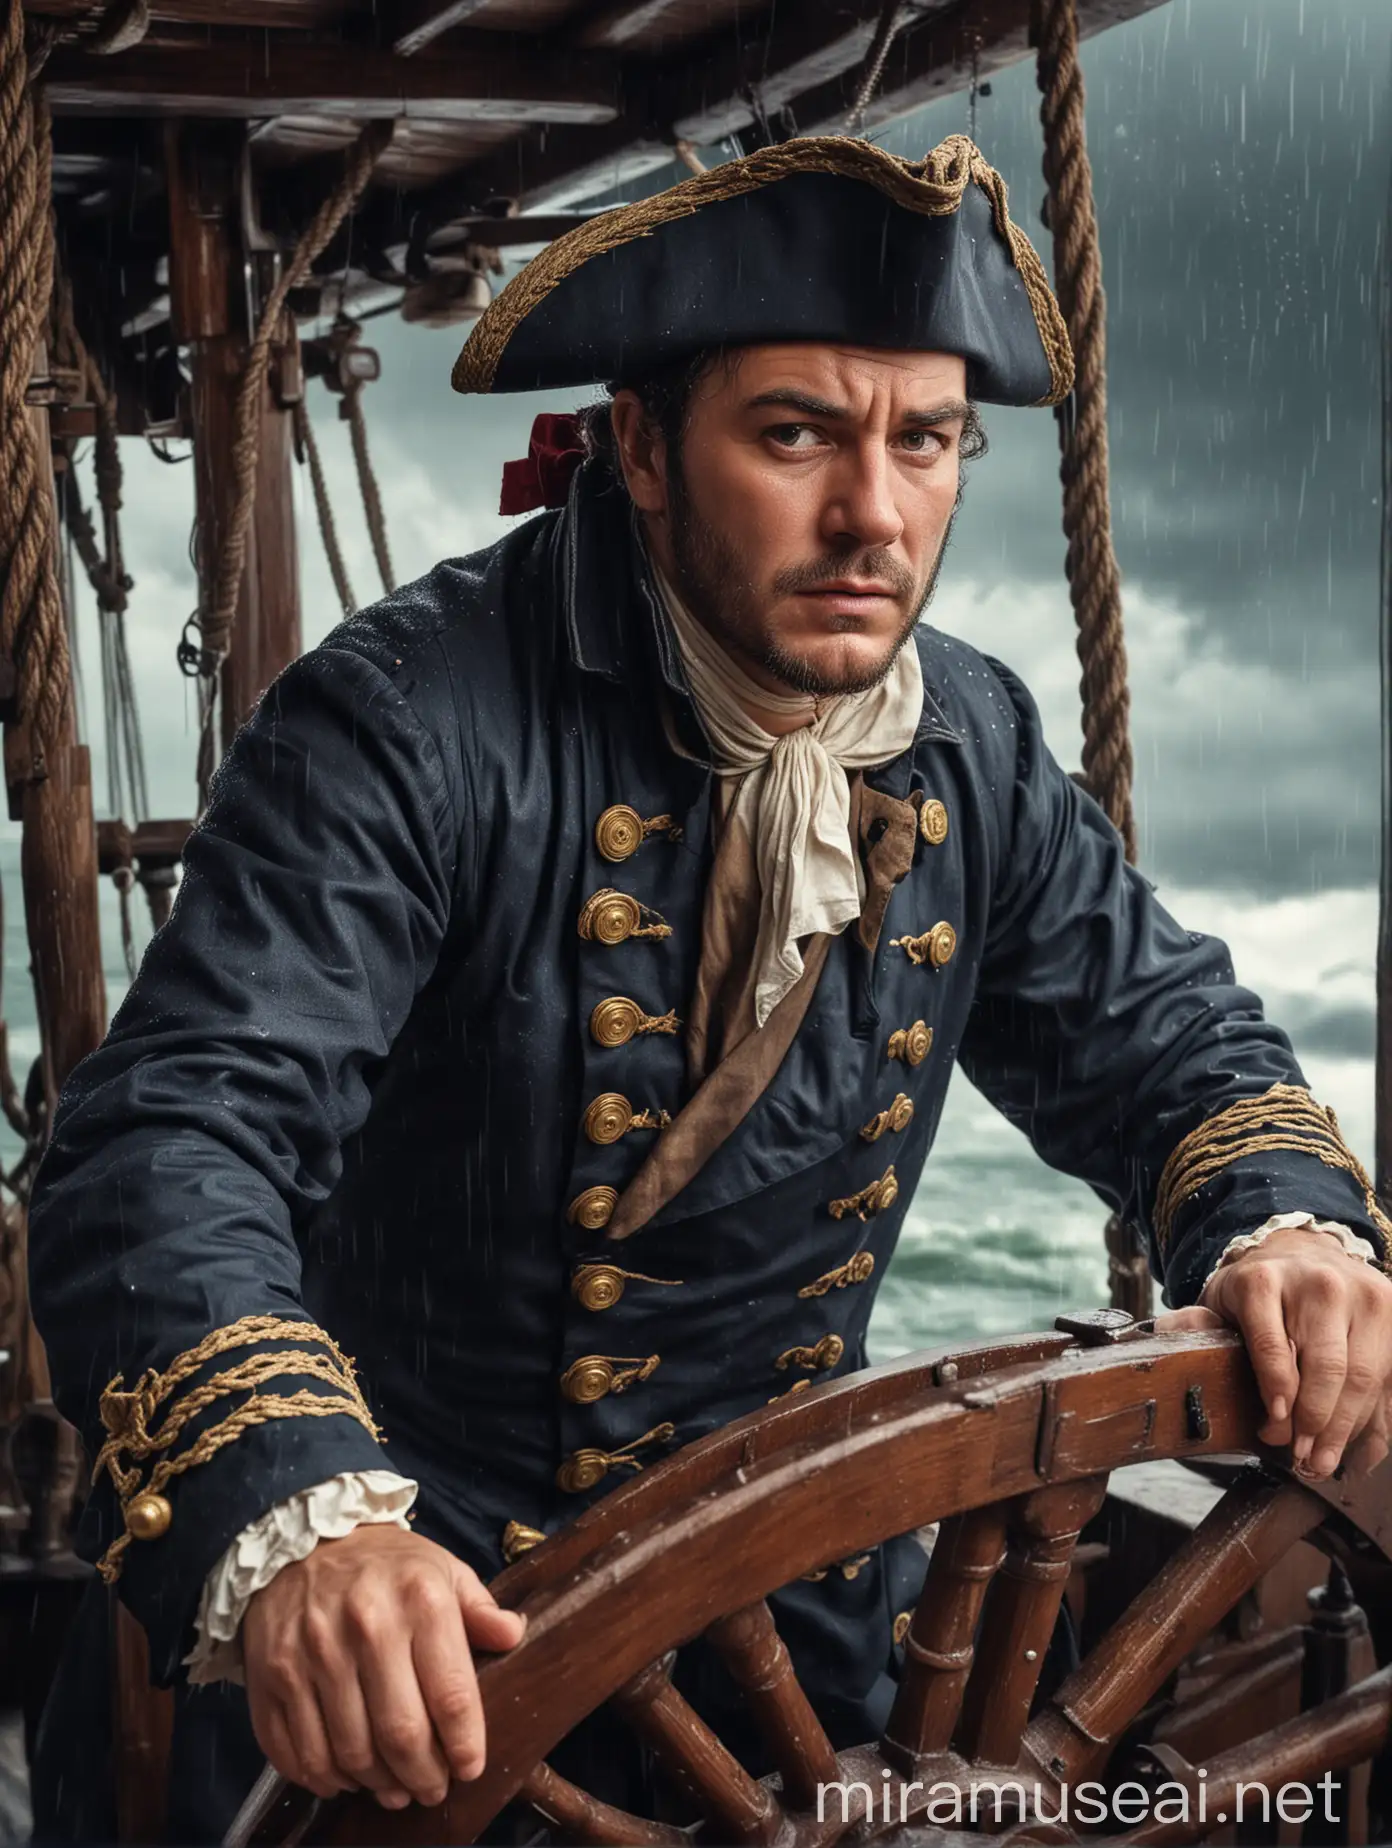 Men from the image as a ship captain from XVIII century. Standing behind the steering wheel during heavy storm on a wooden ship